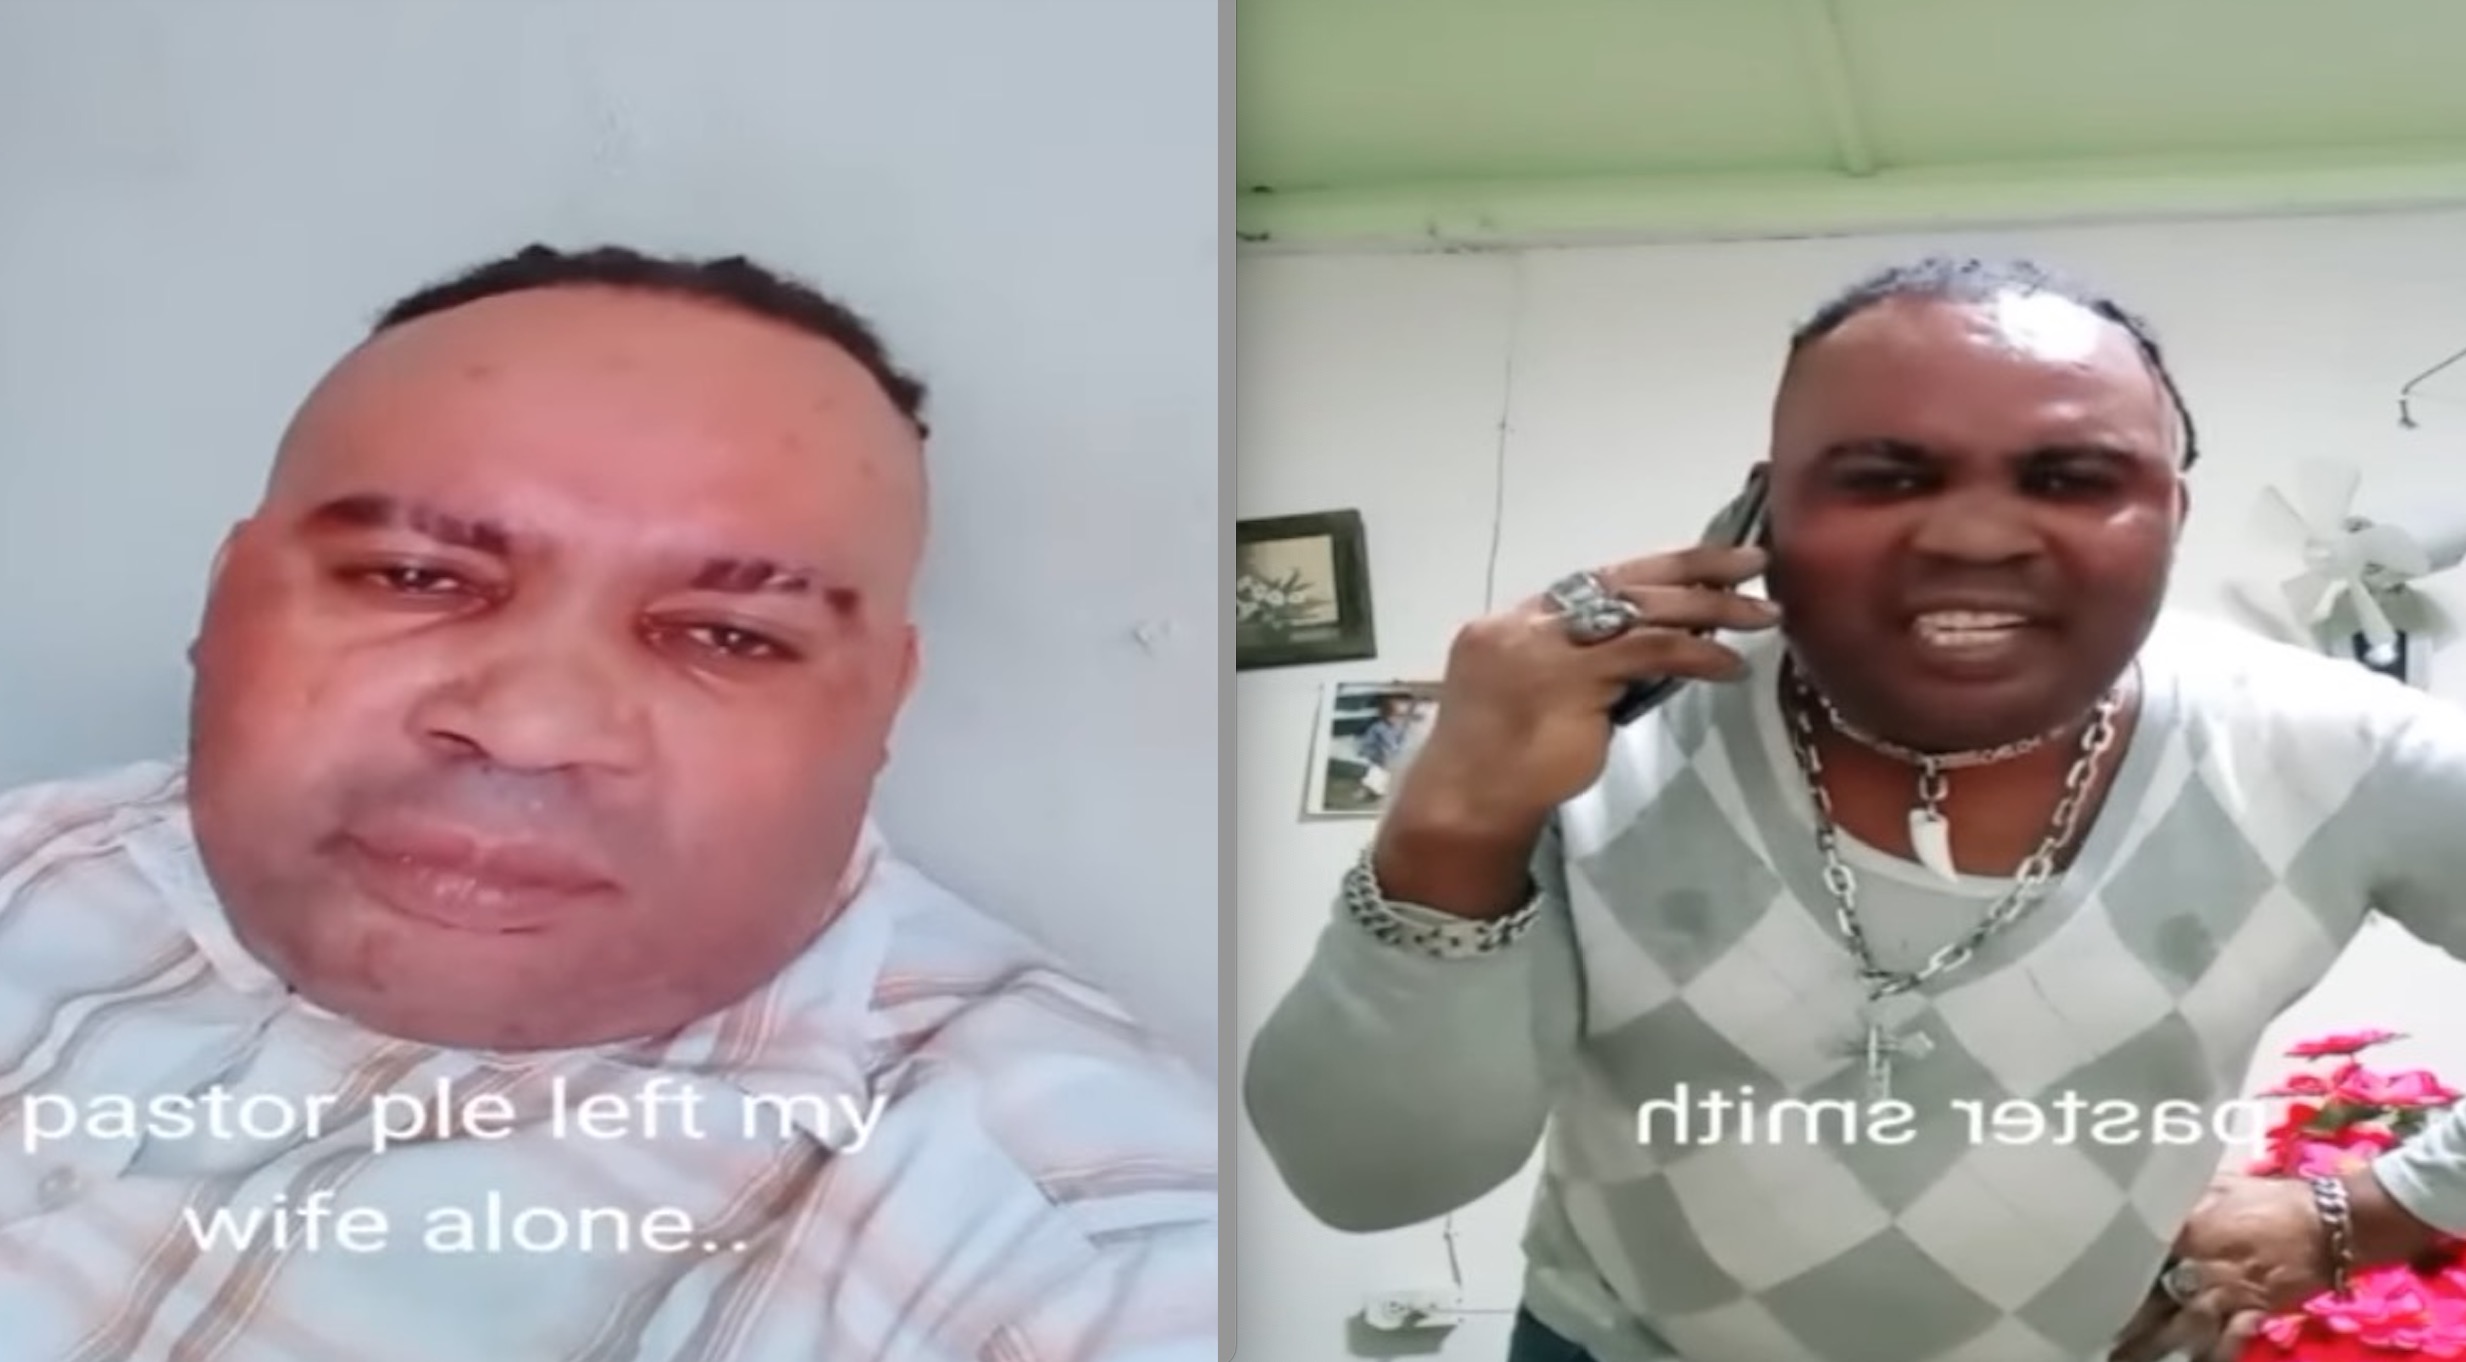 Husband Puts Portmore Pastor on Blast For Having Sex With His Wife, "Yuh Nyam Weh Me Wife From Me" - Watch Video